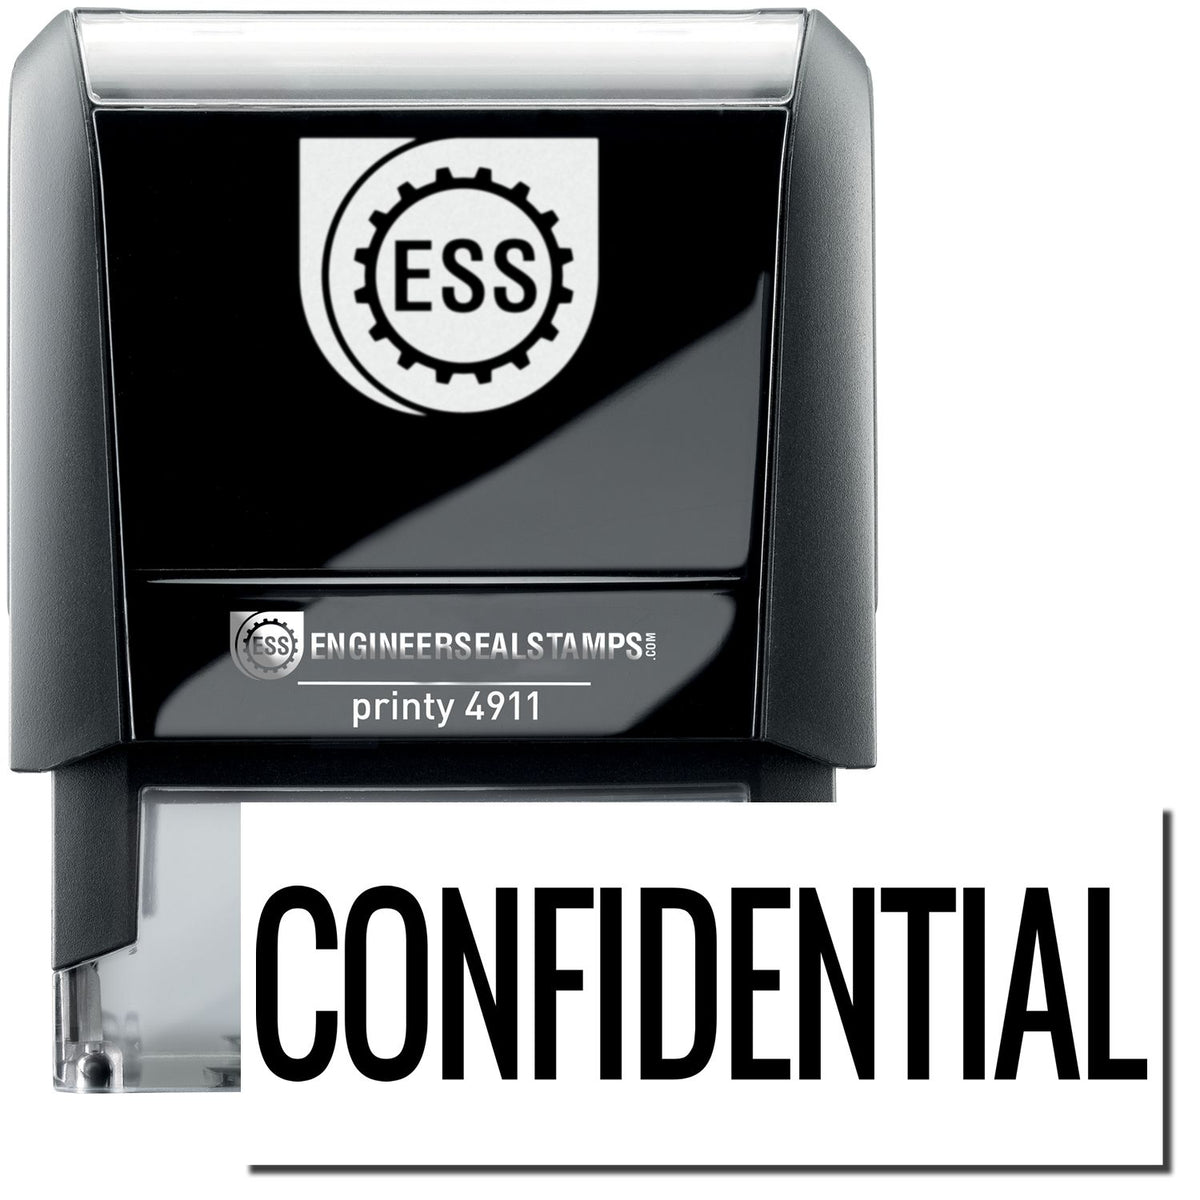 A self-inking stamp with a stamped image showing how the text &quot;CONFIDENTIAL&quot; in a narrow font is displayed after stamping.